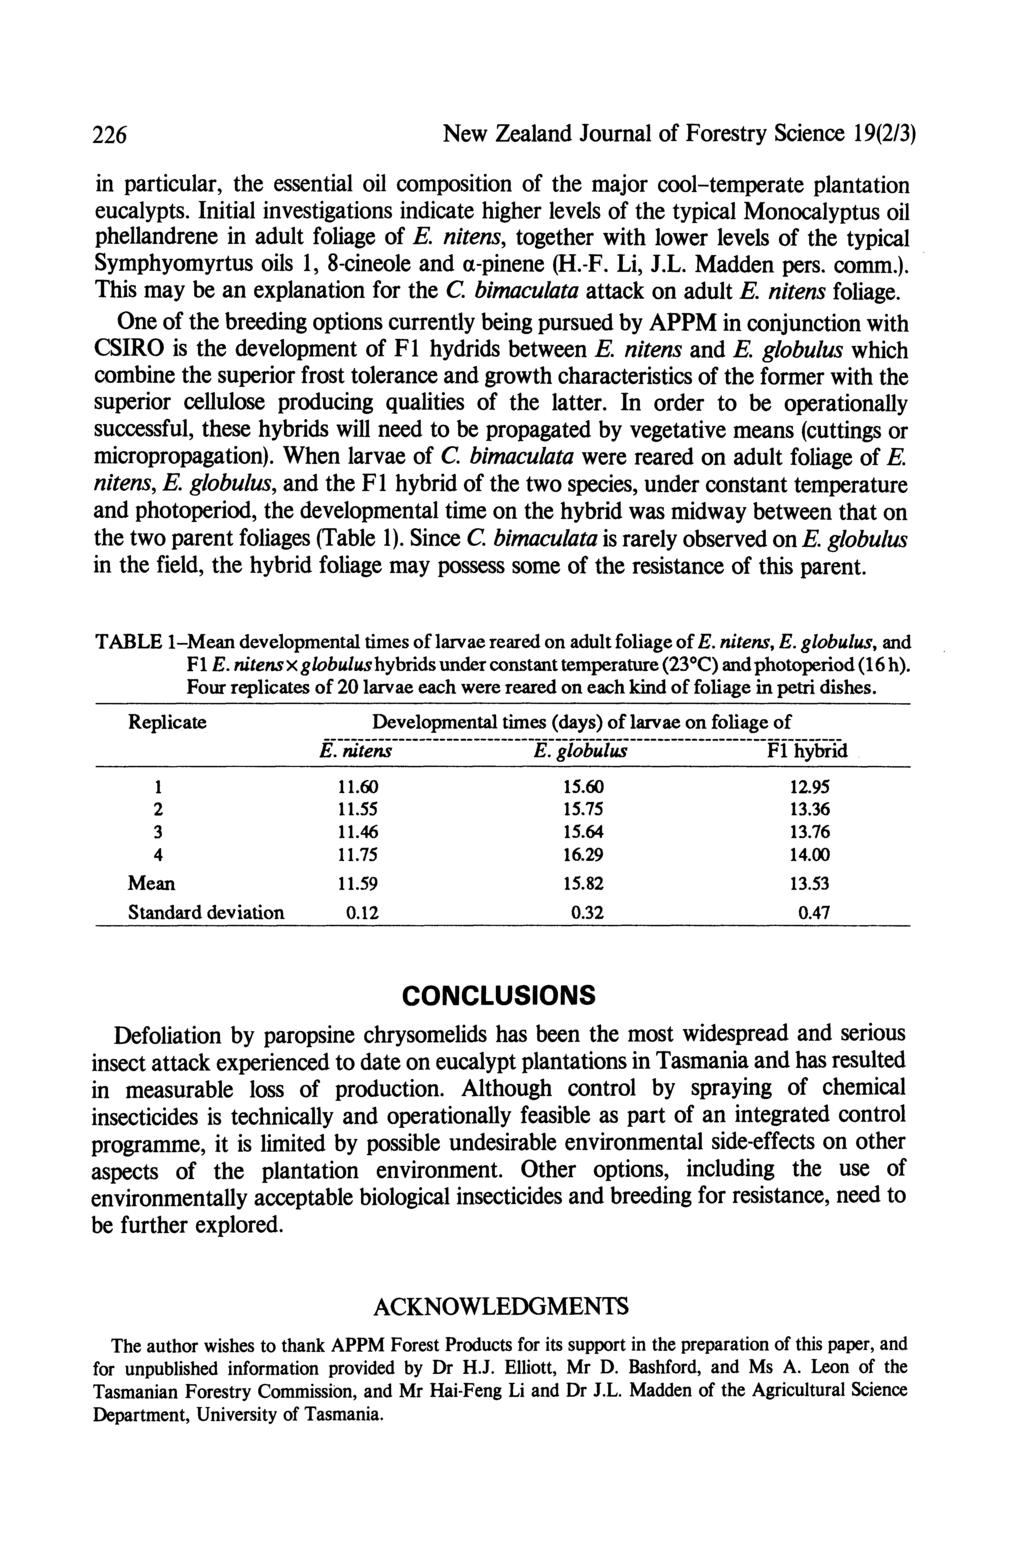 226 New Zealand Journal of Forestry Science 19(2/3) in particular, the essential oil composition of the major cool-temperate plantation eucalypts.